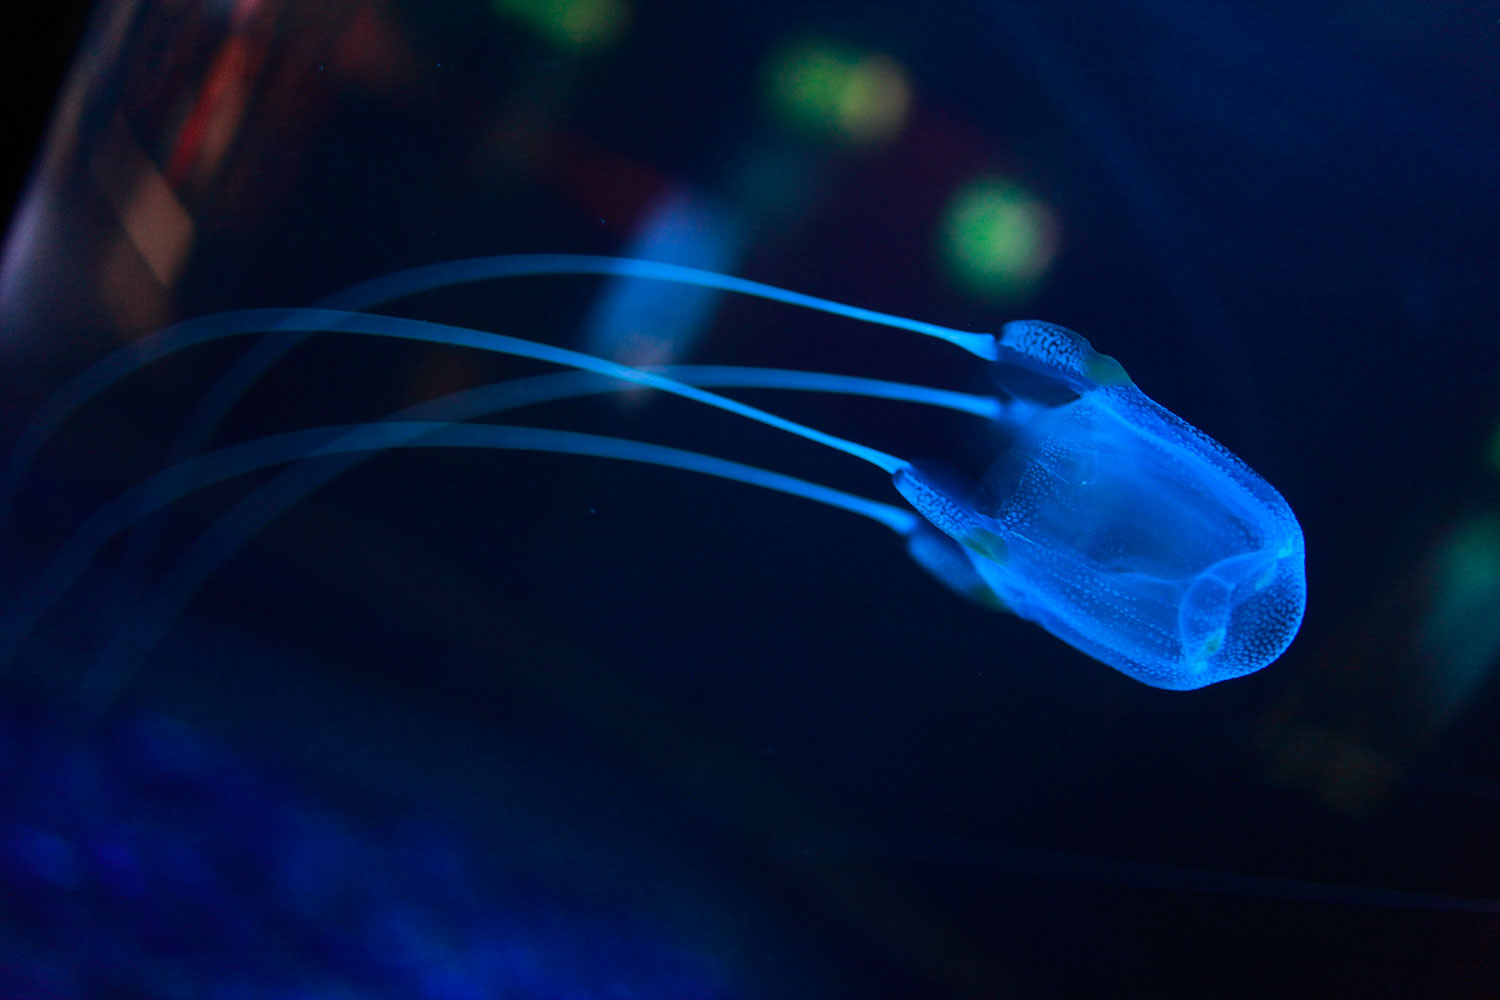 A Box Jellyfish swims at the Two Oceans Aquarium in Cape Town, South Africa, August 1, 2011. Box Jellyfish occur off the West coast of South Africa and are often encountered in swarms by scuba divers. These Jellyfish have strong tentacles armed with thousands of stinging cells called Nematocysts. The cells are used to stun and kill prey which is then pulled into the mouth by the tentacles.